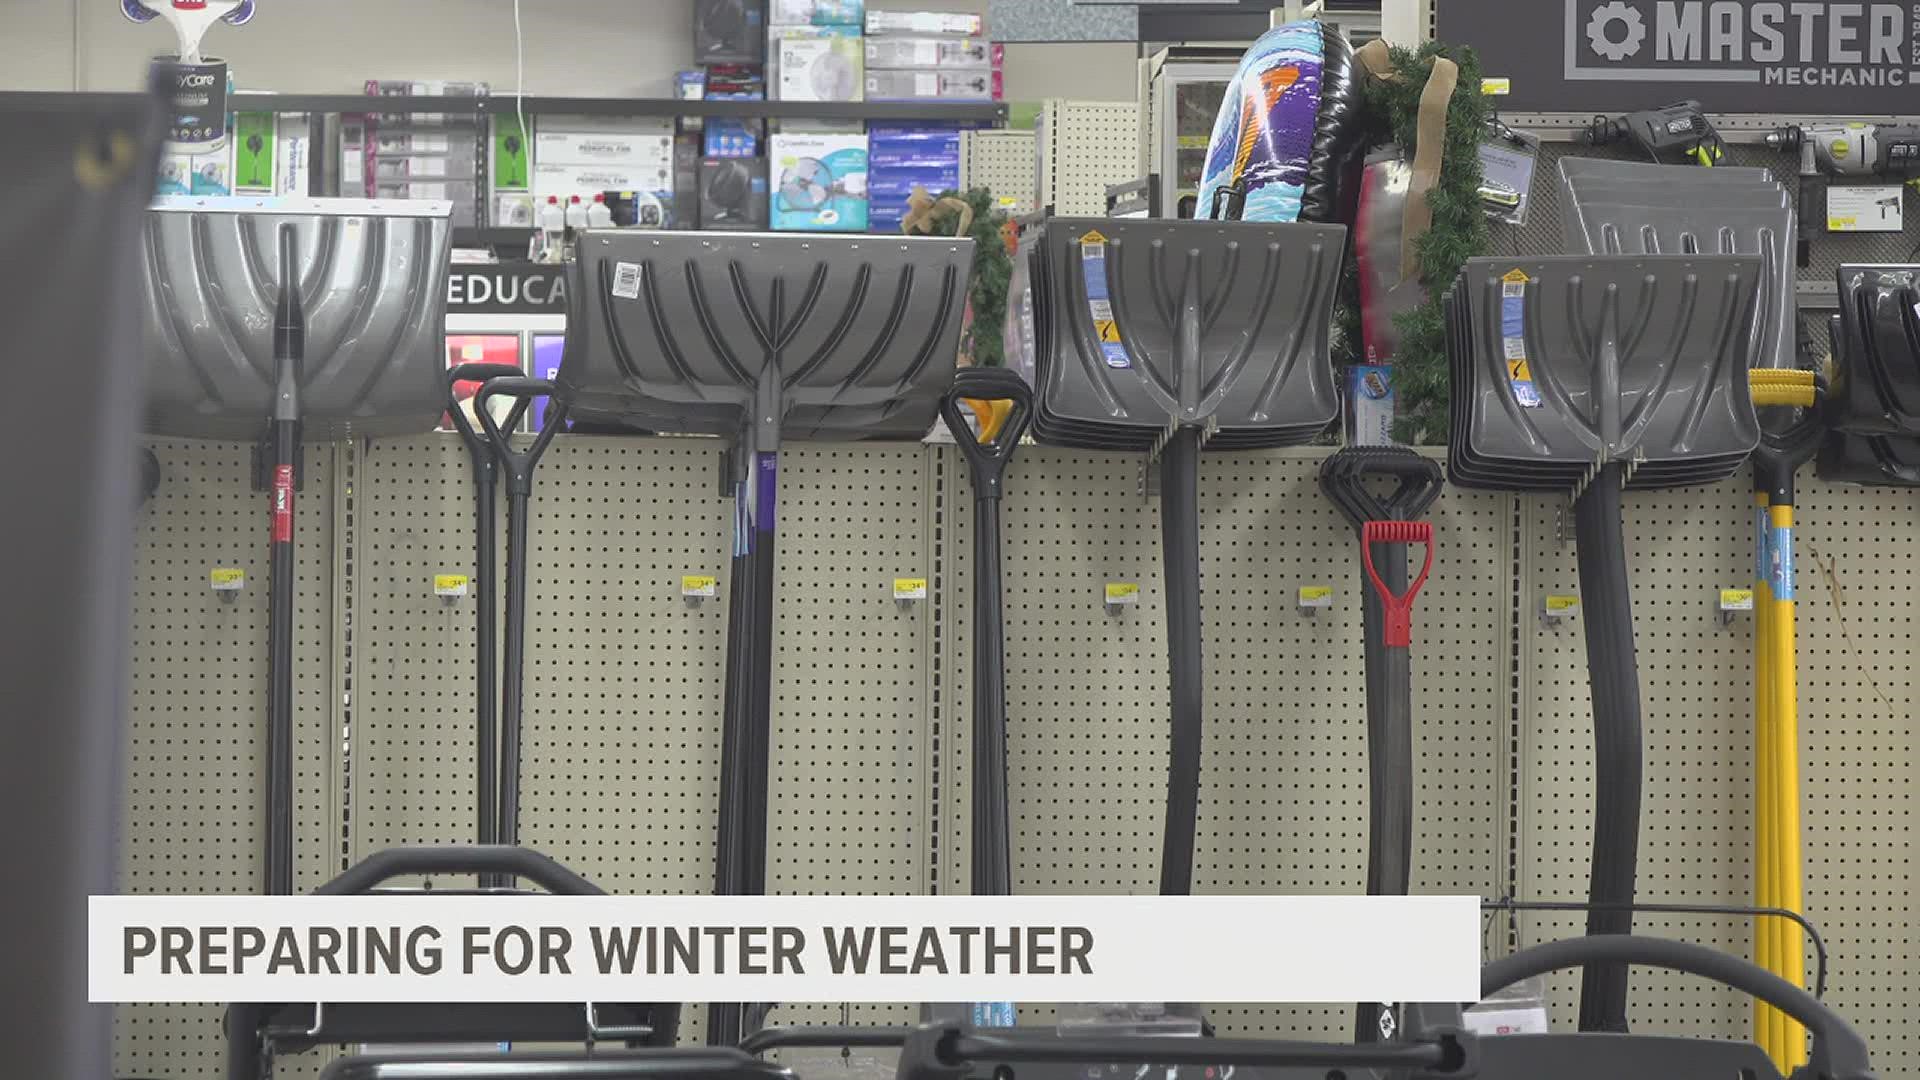 PennDot gears up for predicted winter weather as shoppers hit hardware stores for supplies.